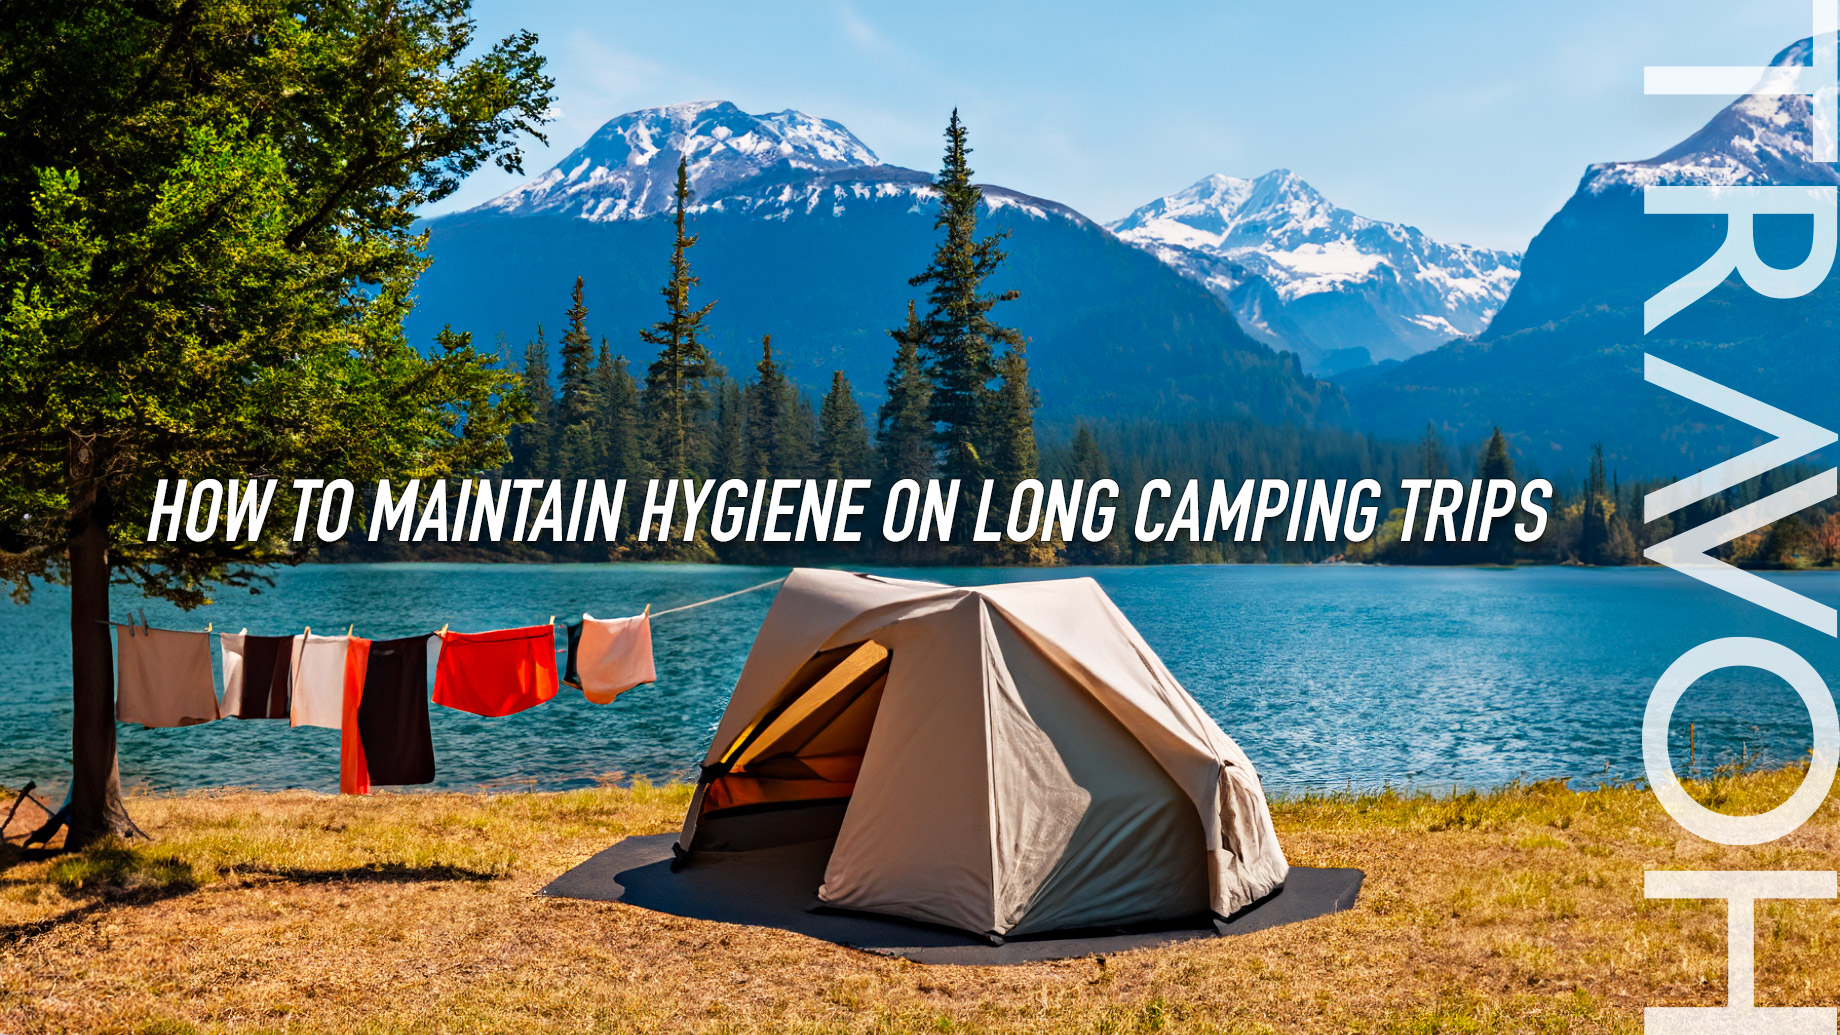 How To Maintain Hygiene on Long Camping Trips